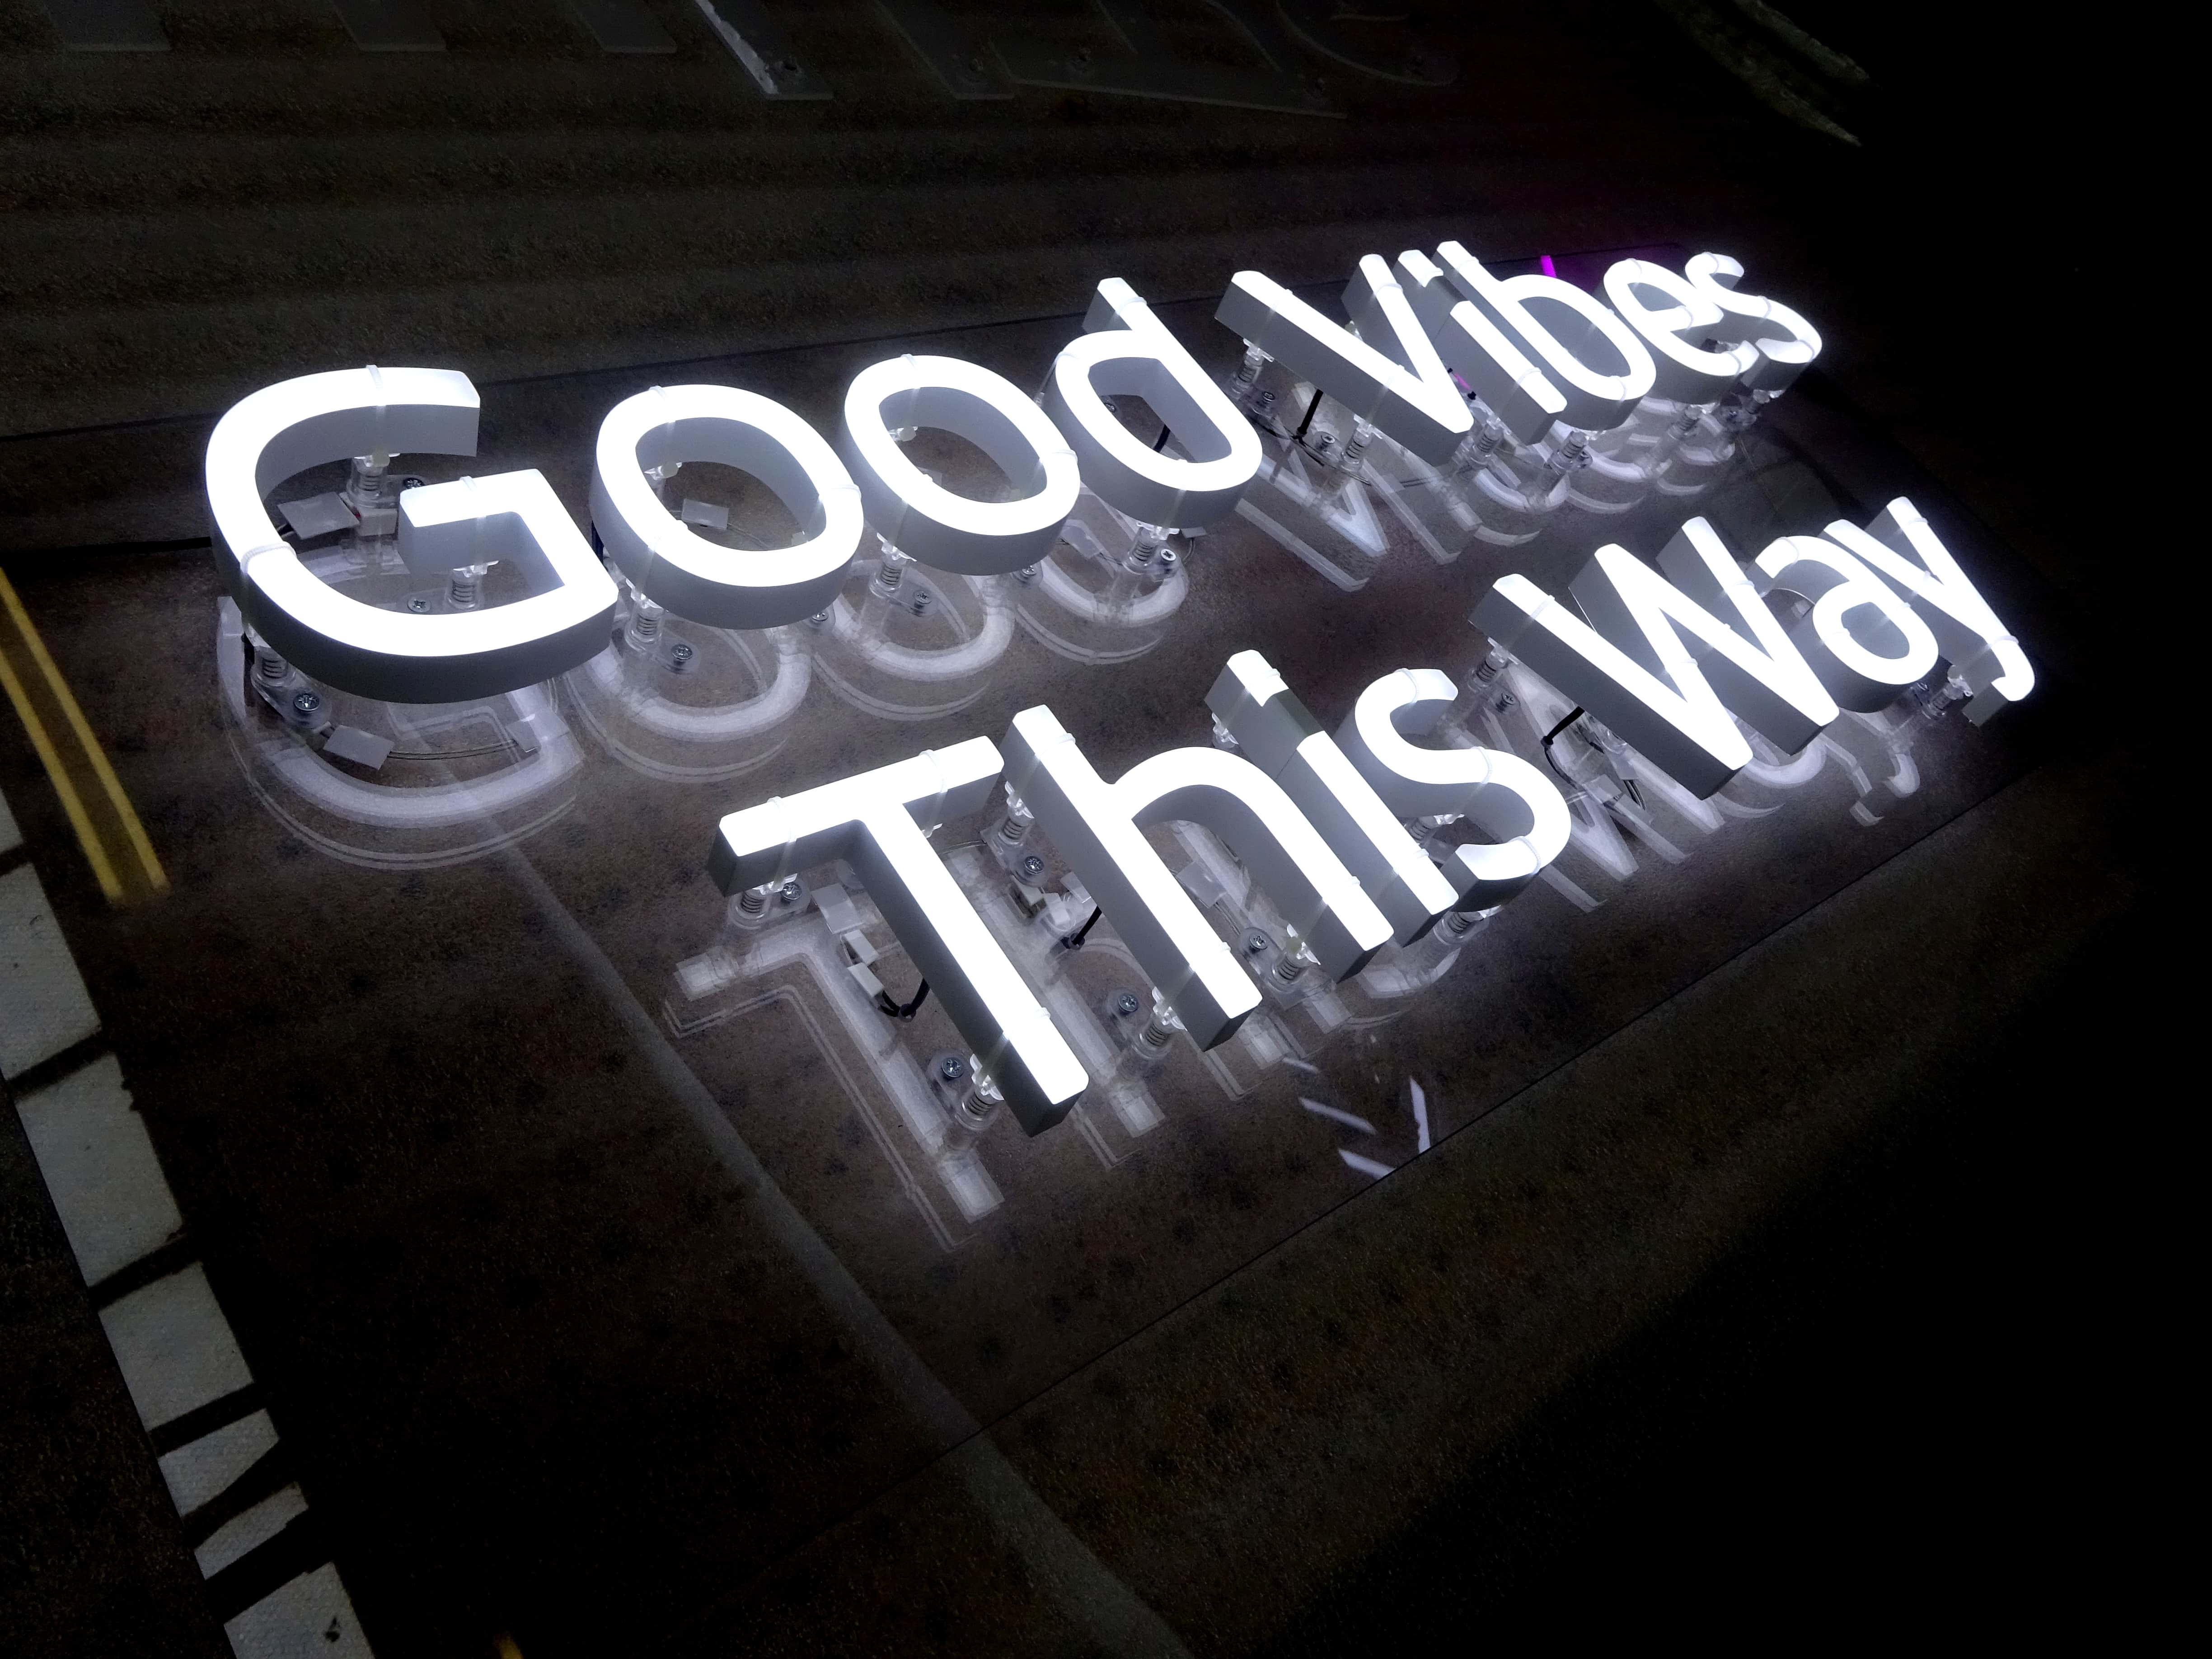 Acrylic-backed neon sign reading 'Good Vibes this Way'. Motivational neon signs for pubs and cocktail bars in energy efficient faux neon.